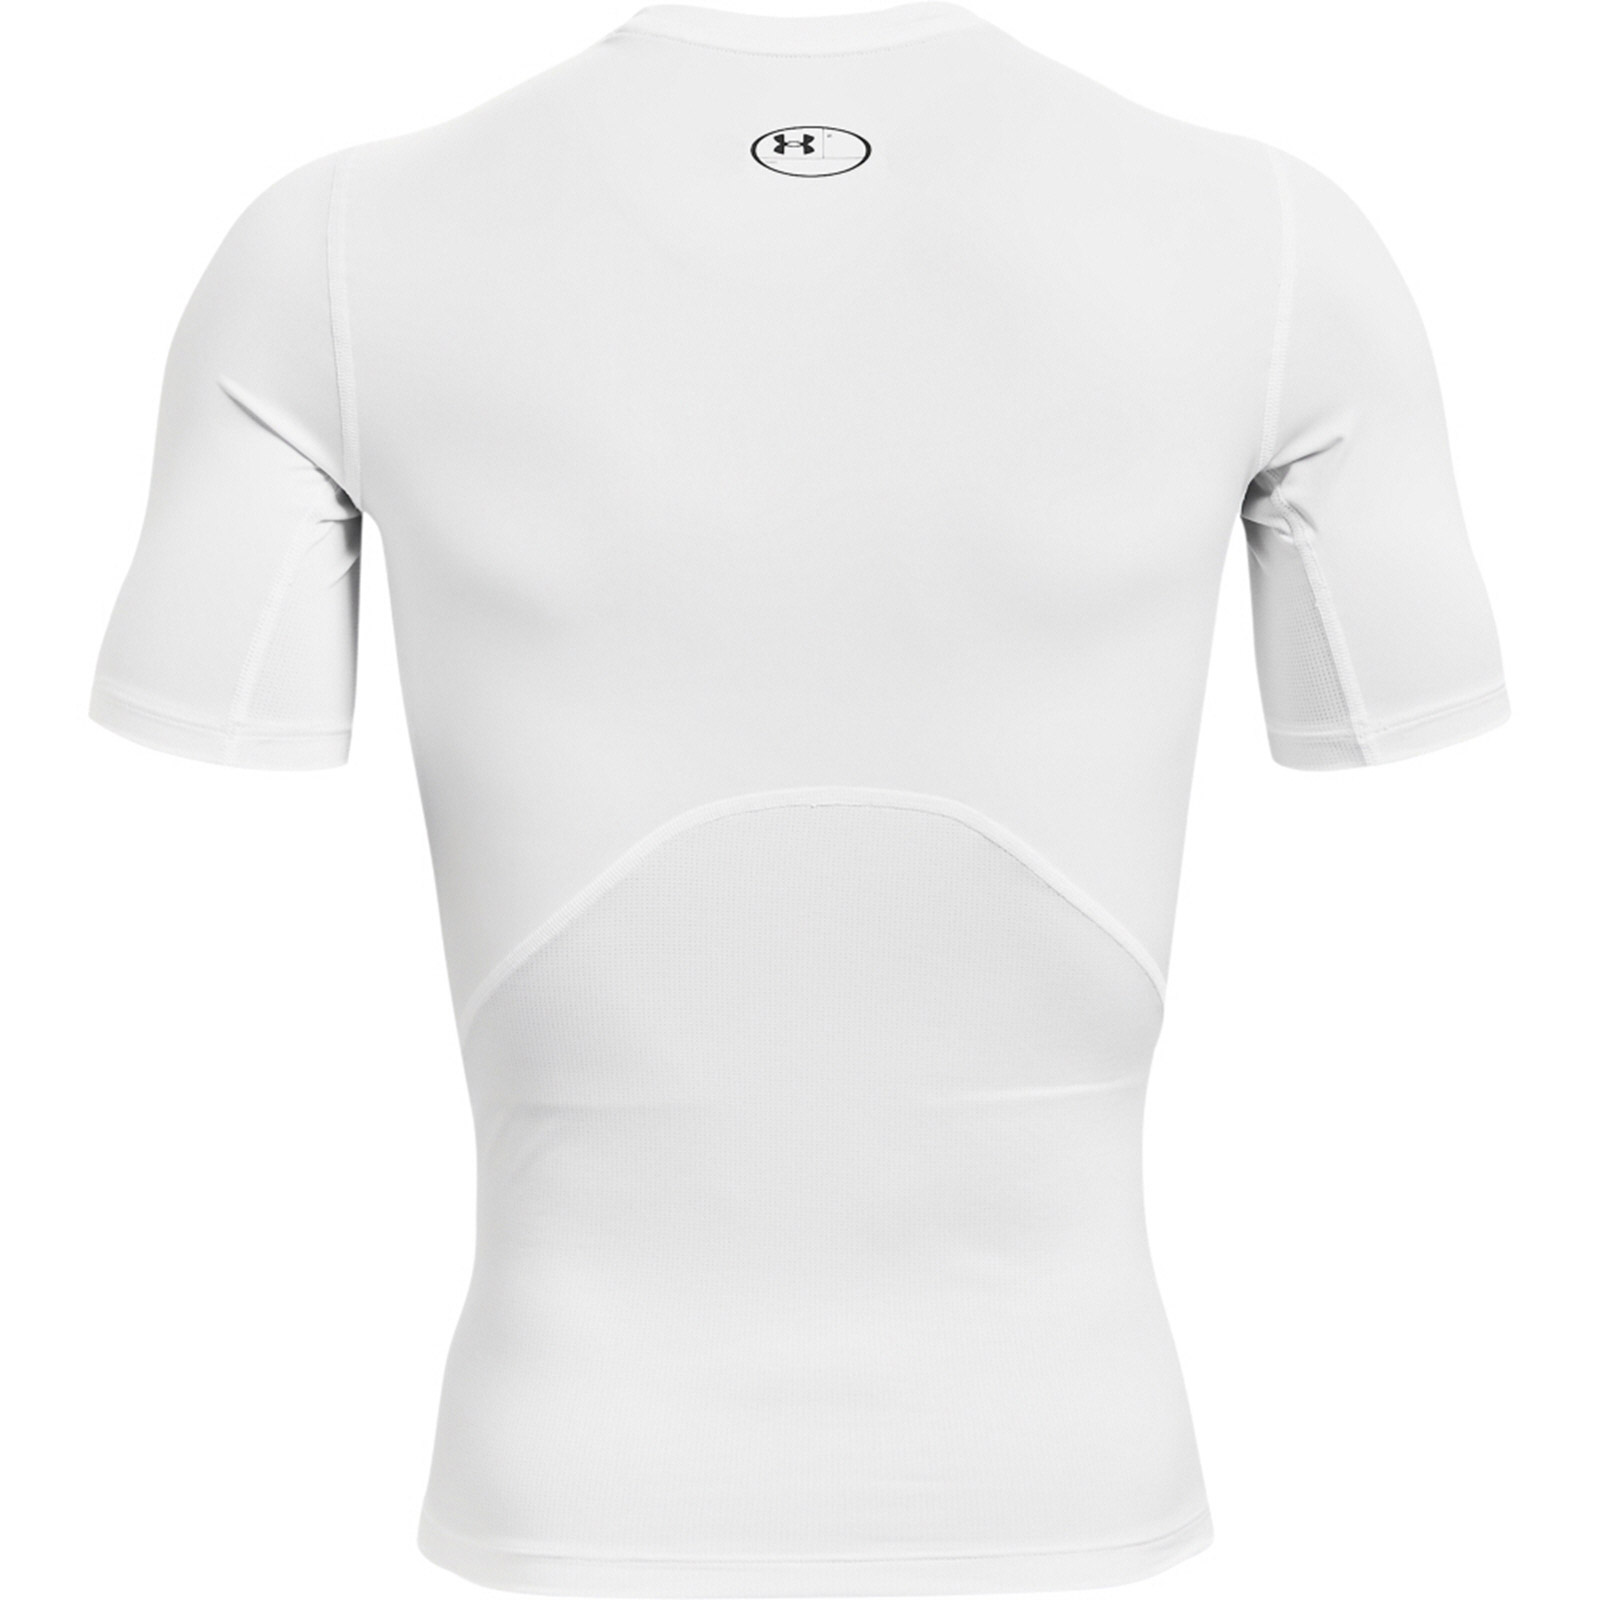 UNDER ARMOUR MENS HG ARMOUR COMPRESSION SHORT SLEEVE T-SHIRT 